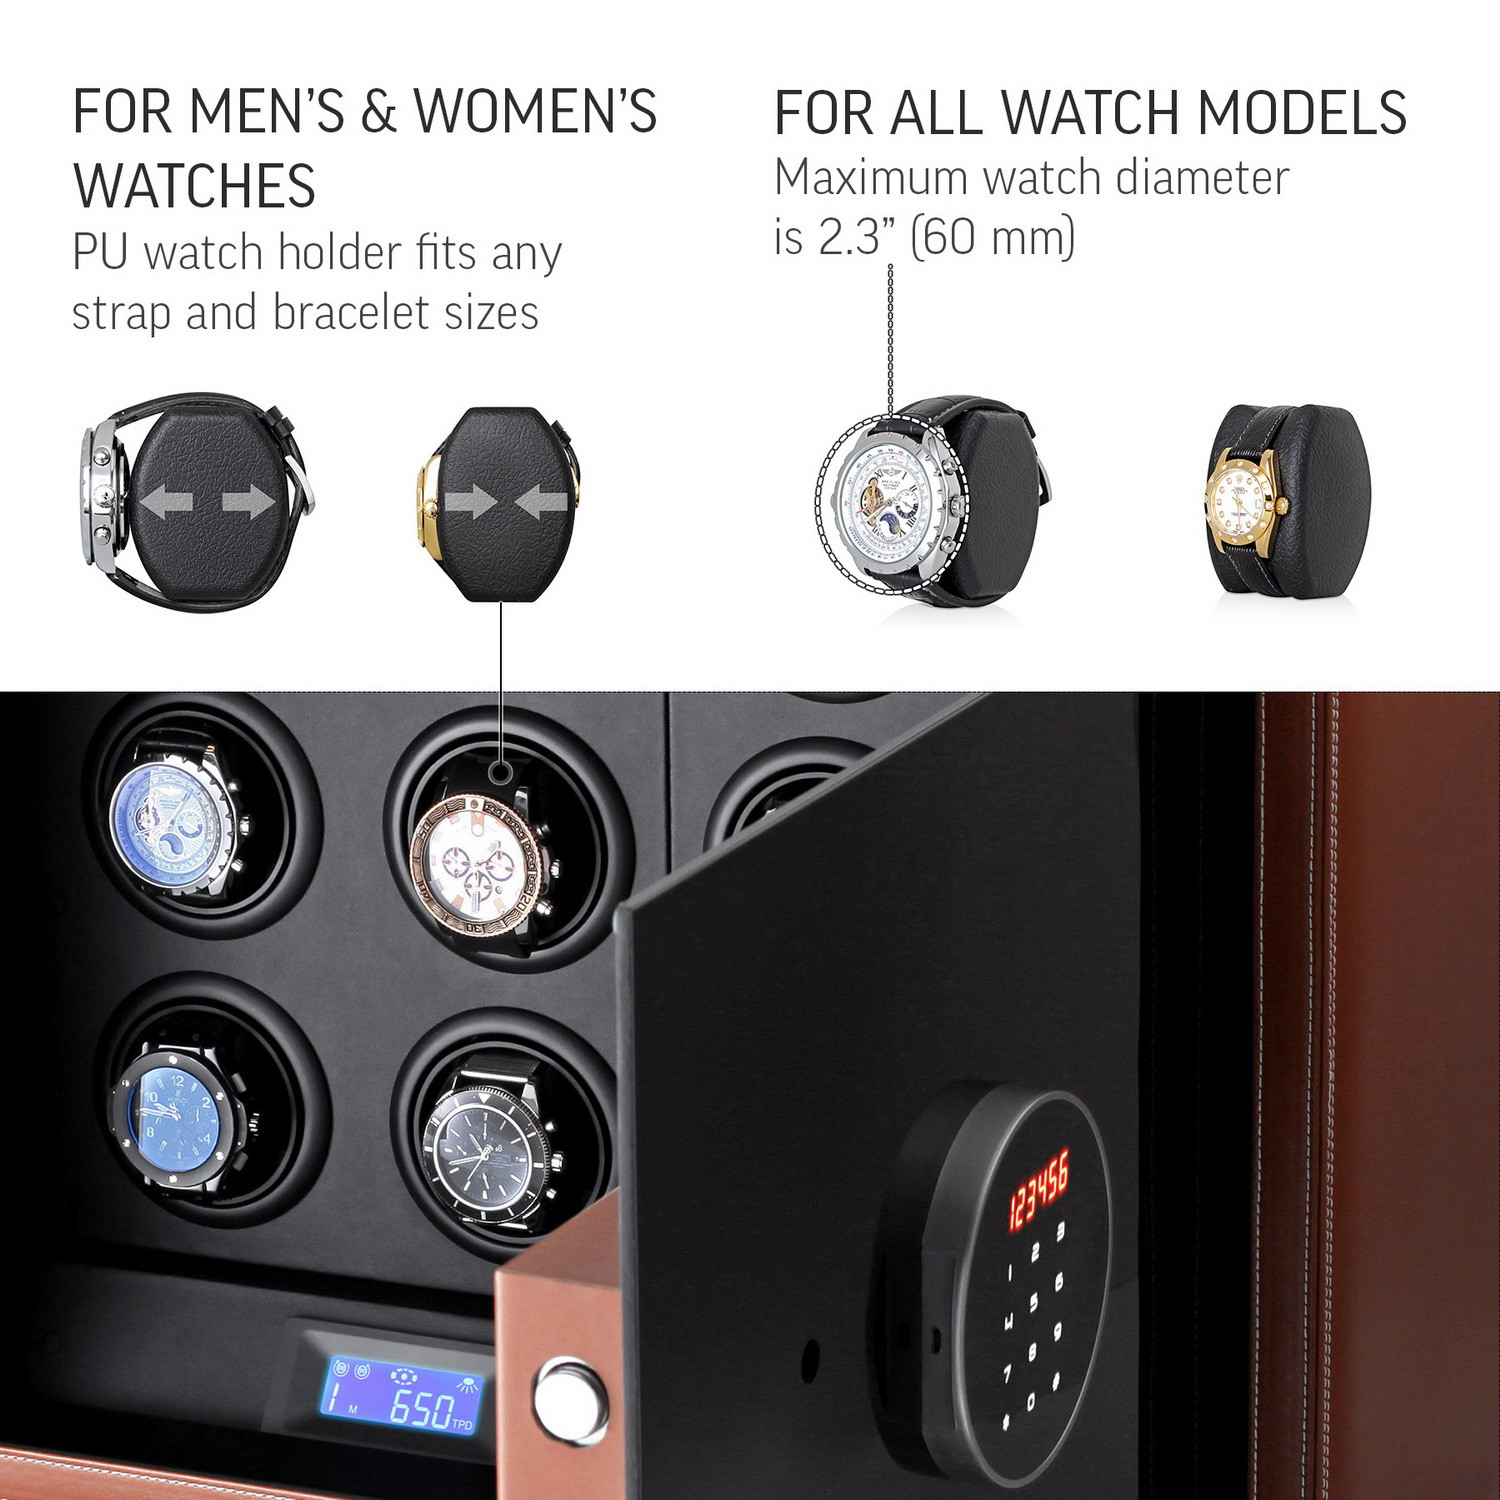 Watch Winder Safe LT-12-Br with Digital Code Lock for 12 Watches